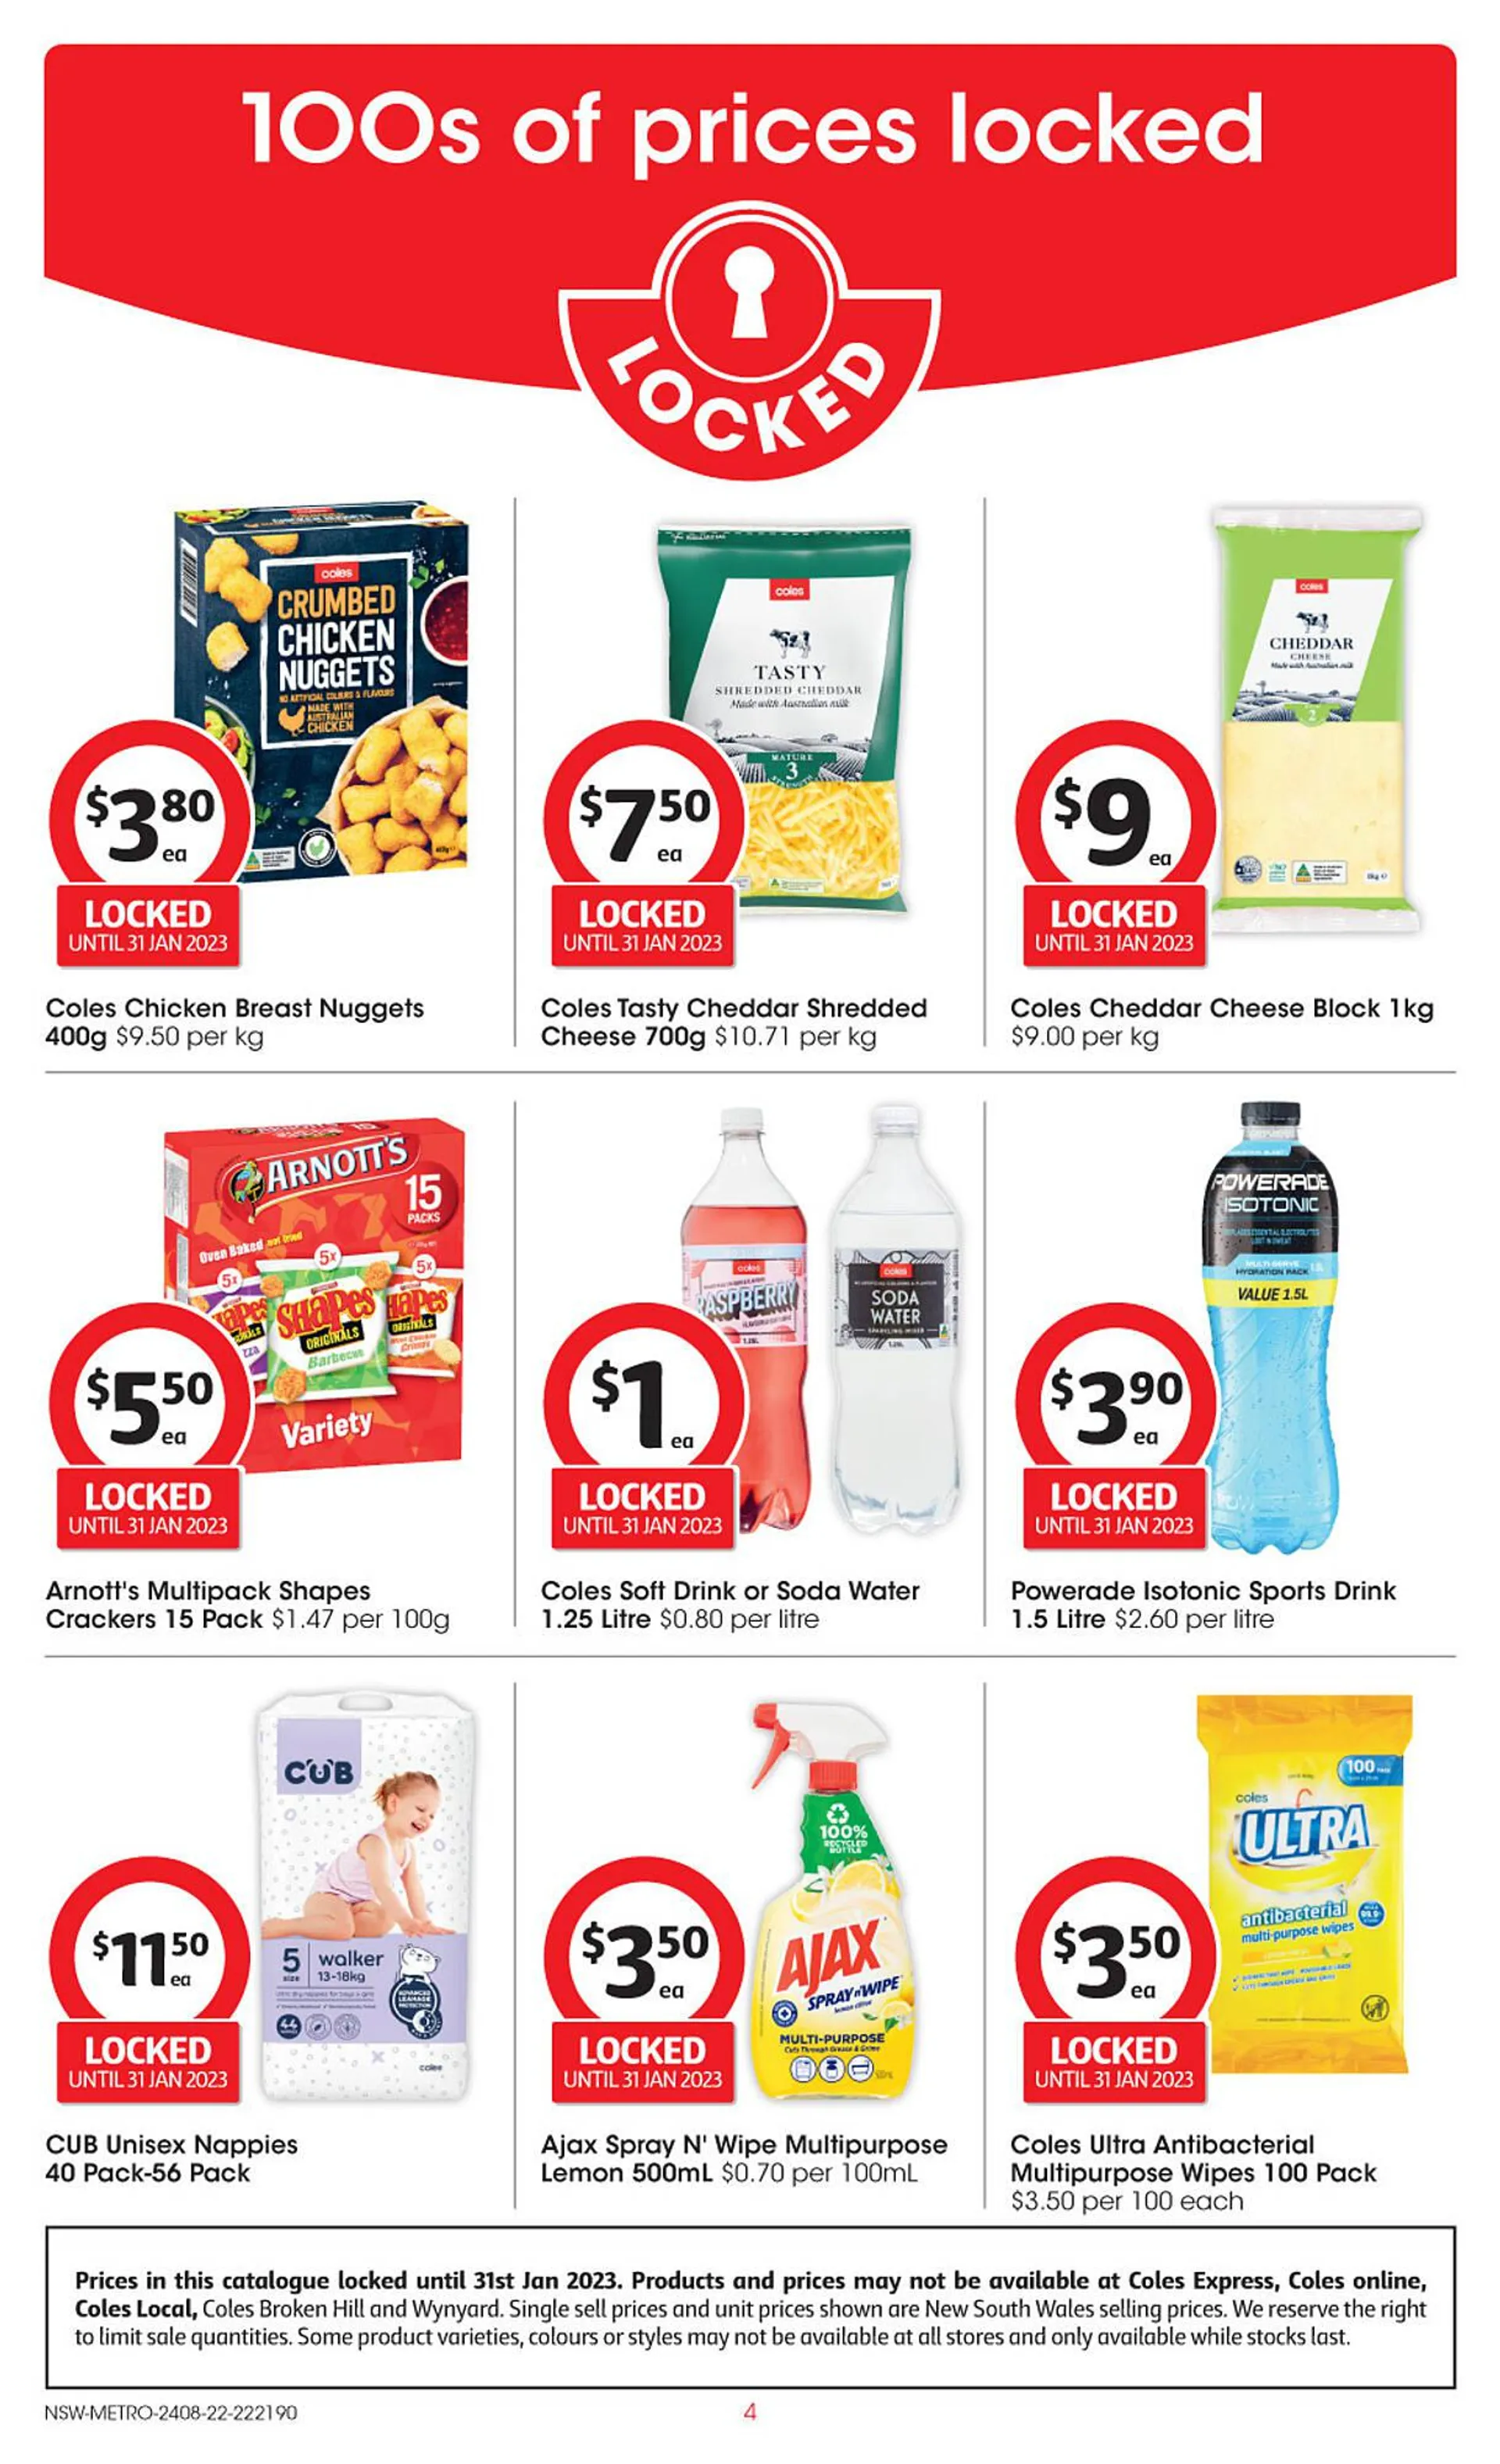 Coles catalogue - 100s of Prices Locked - 4